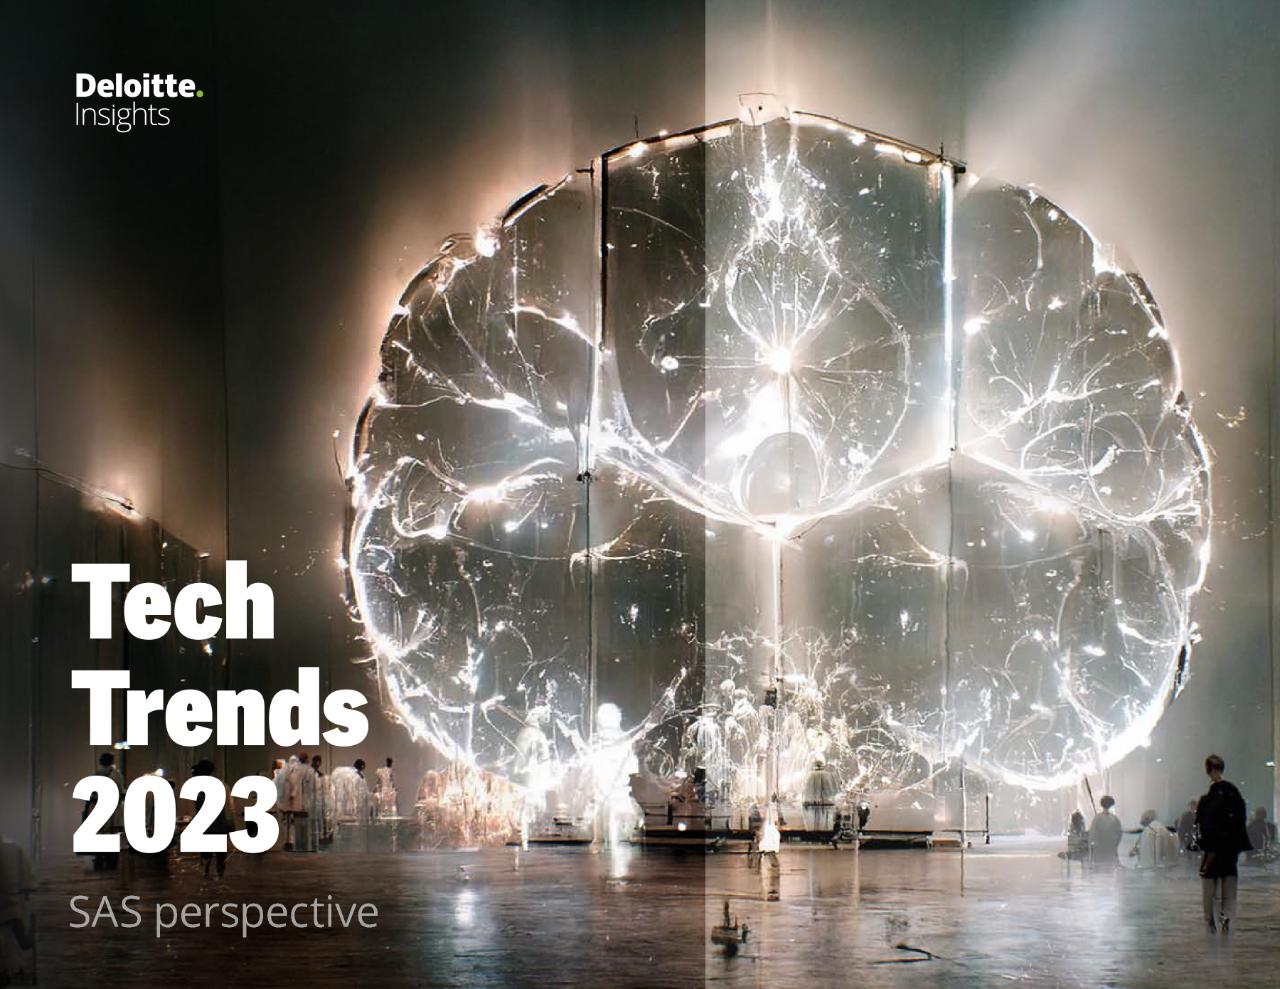 Deloitte Insights Tech Trends 2023 - The SAS Perspective